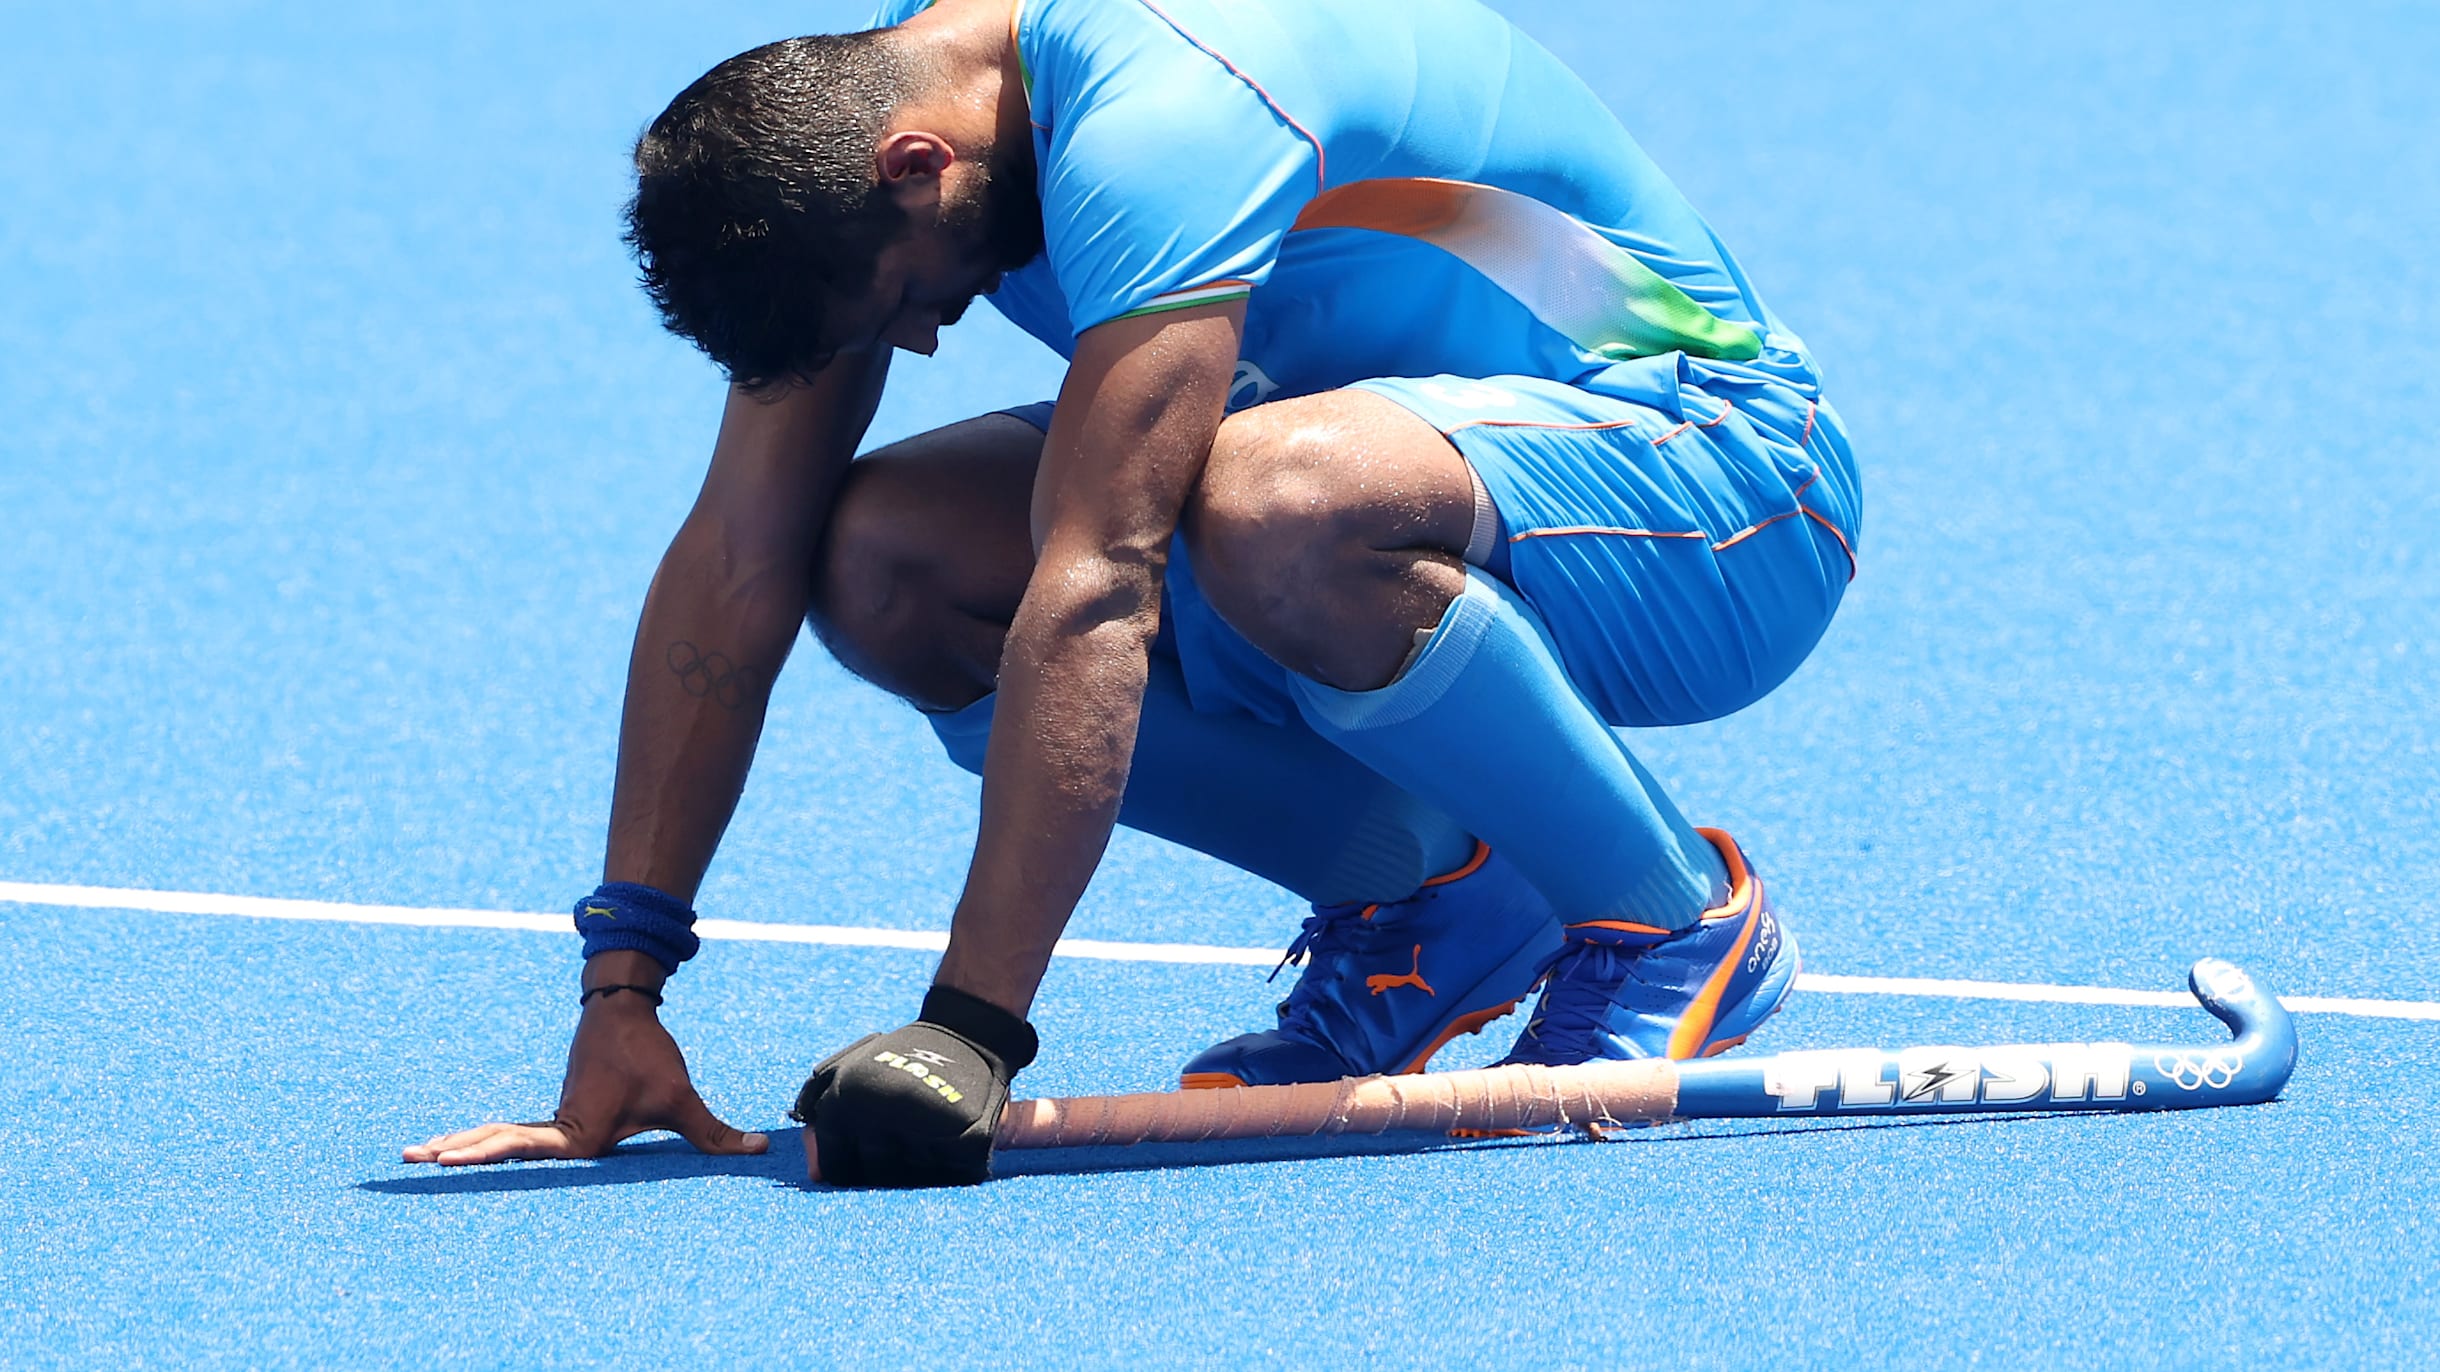 Tokyo Olympics 2020: India loses to top seed Belgium in a fiercely